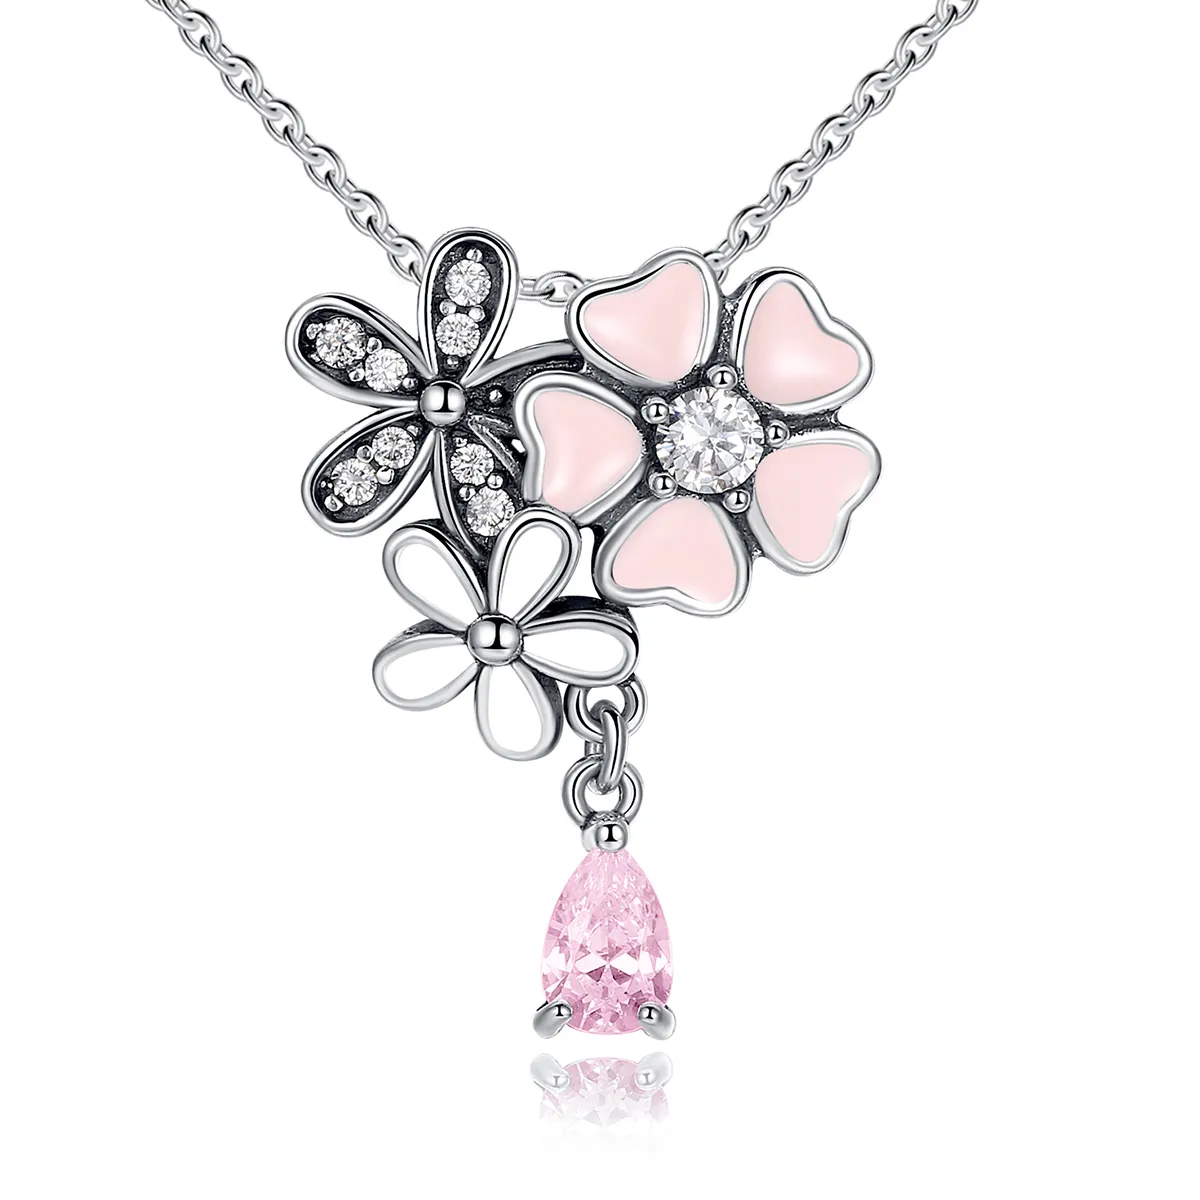 pandora style silver cherry blossom necklace scn046